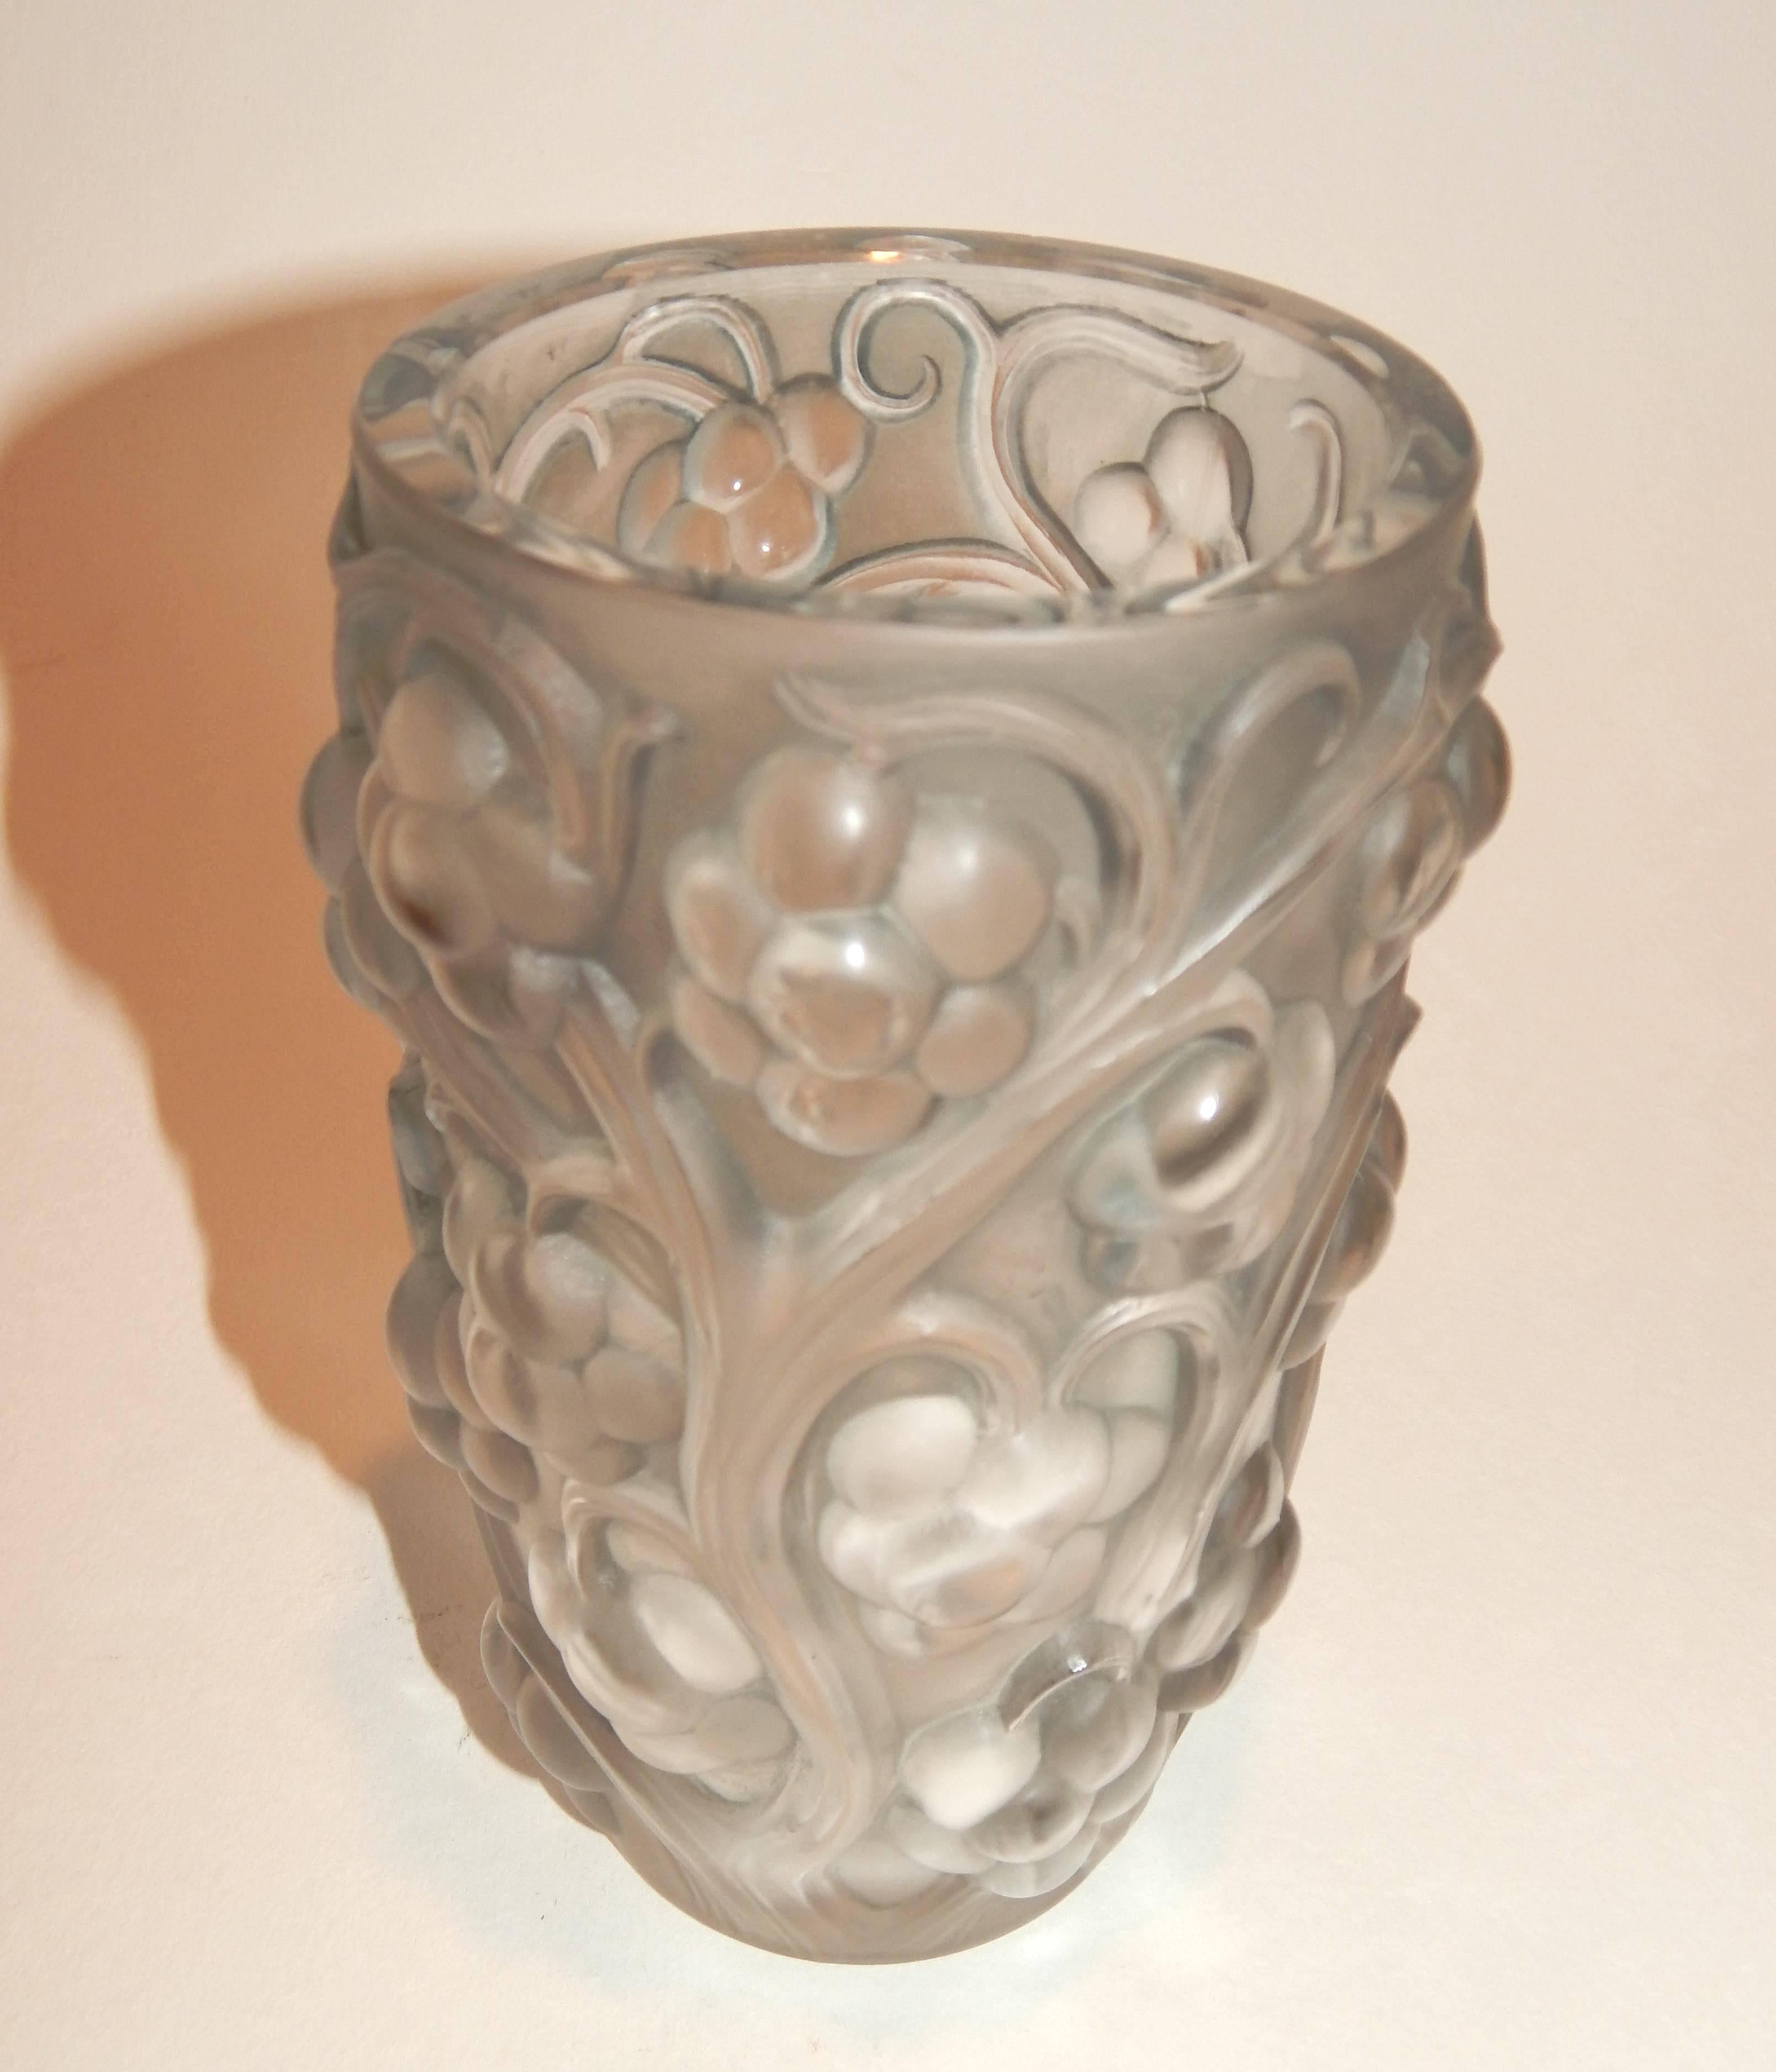 This beautiful heavy molded R. Lalique vase is in mint condition.
Created 1928. Model no. 1032. Etched signature: 